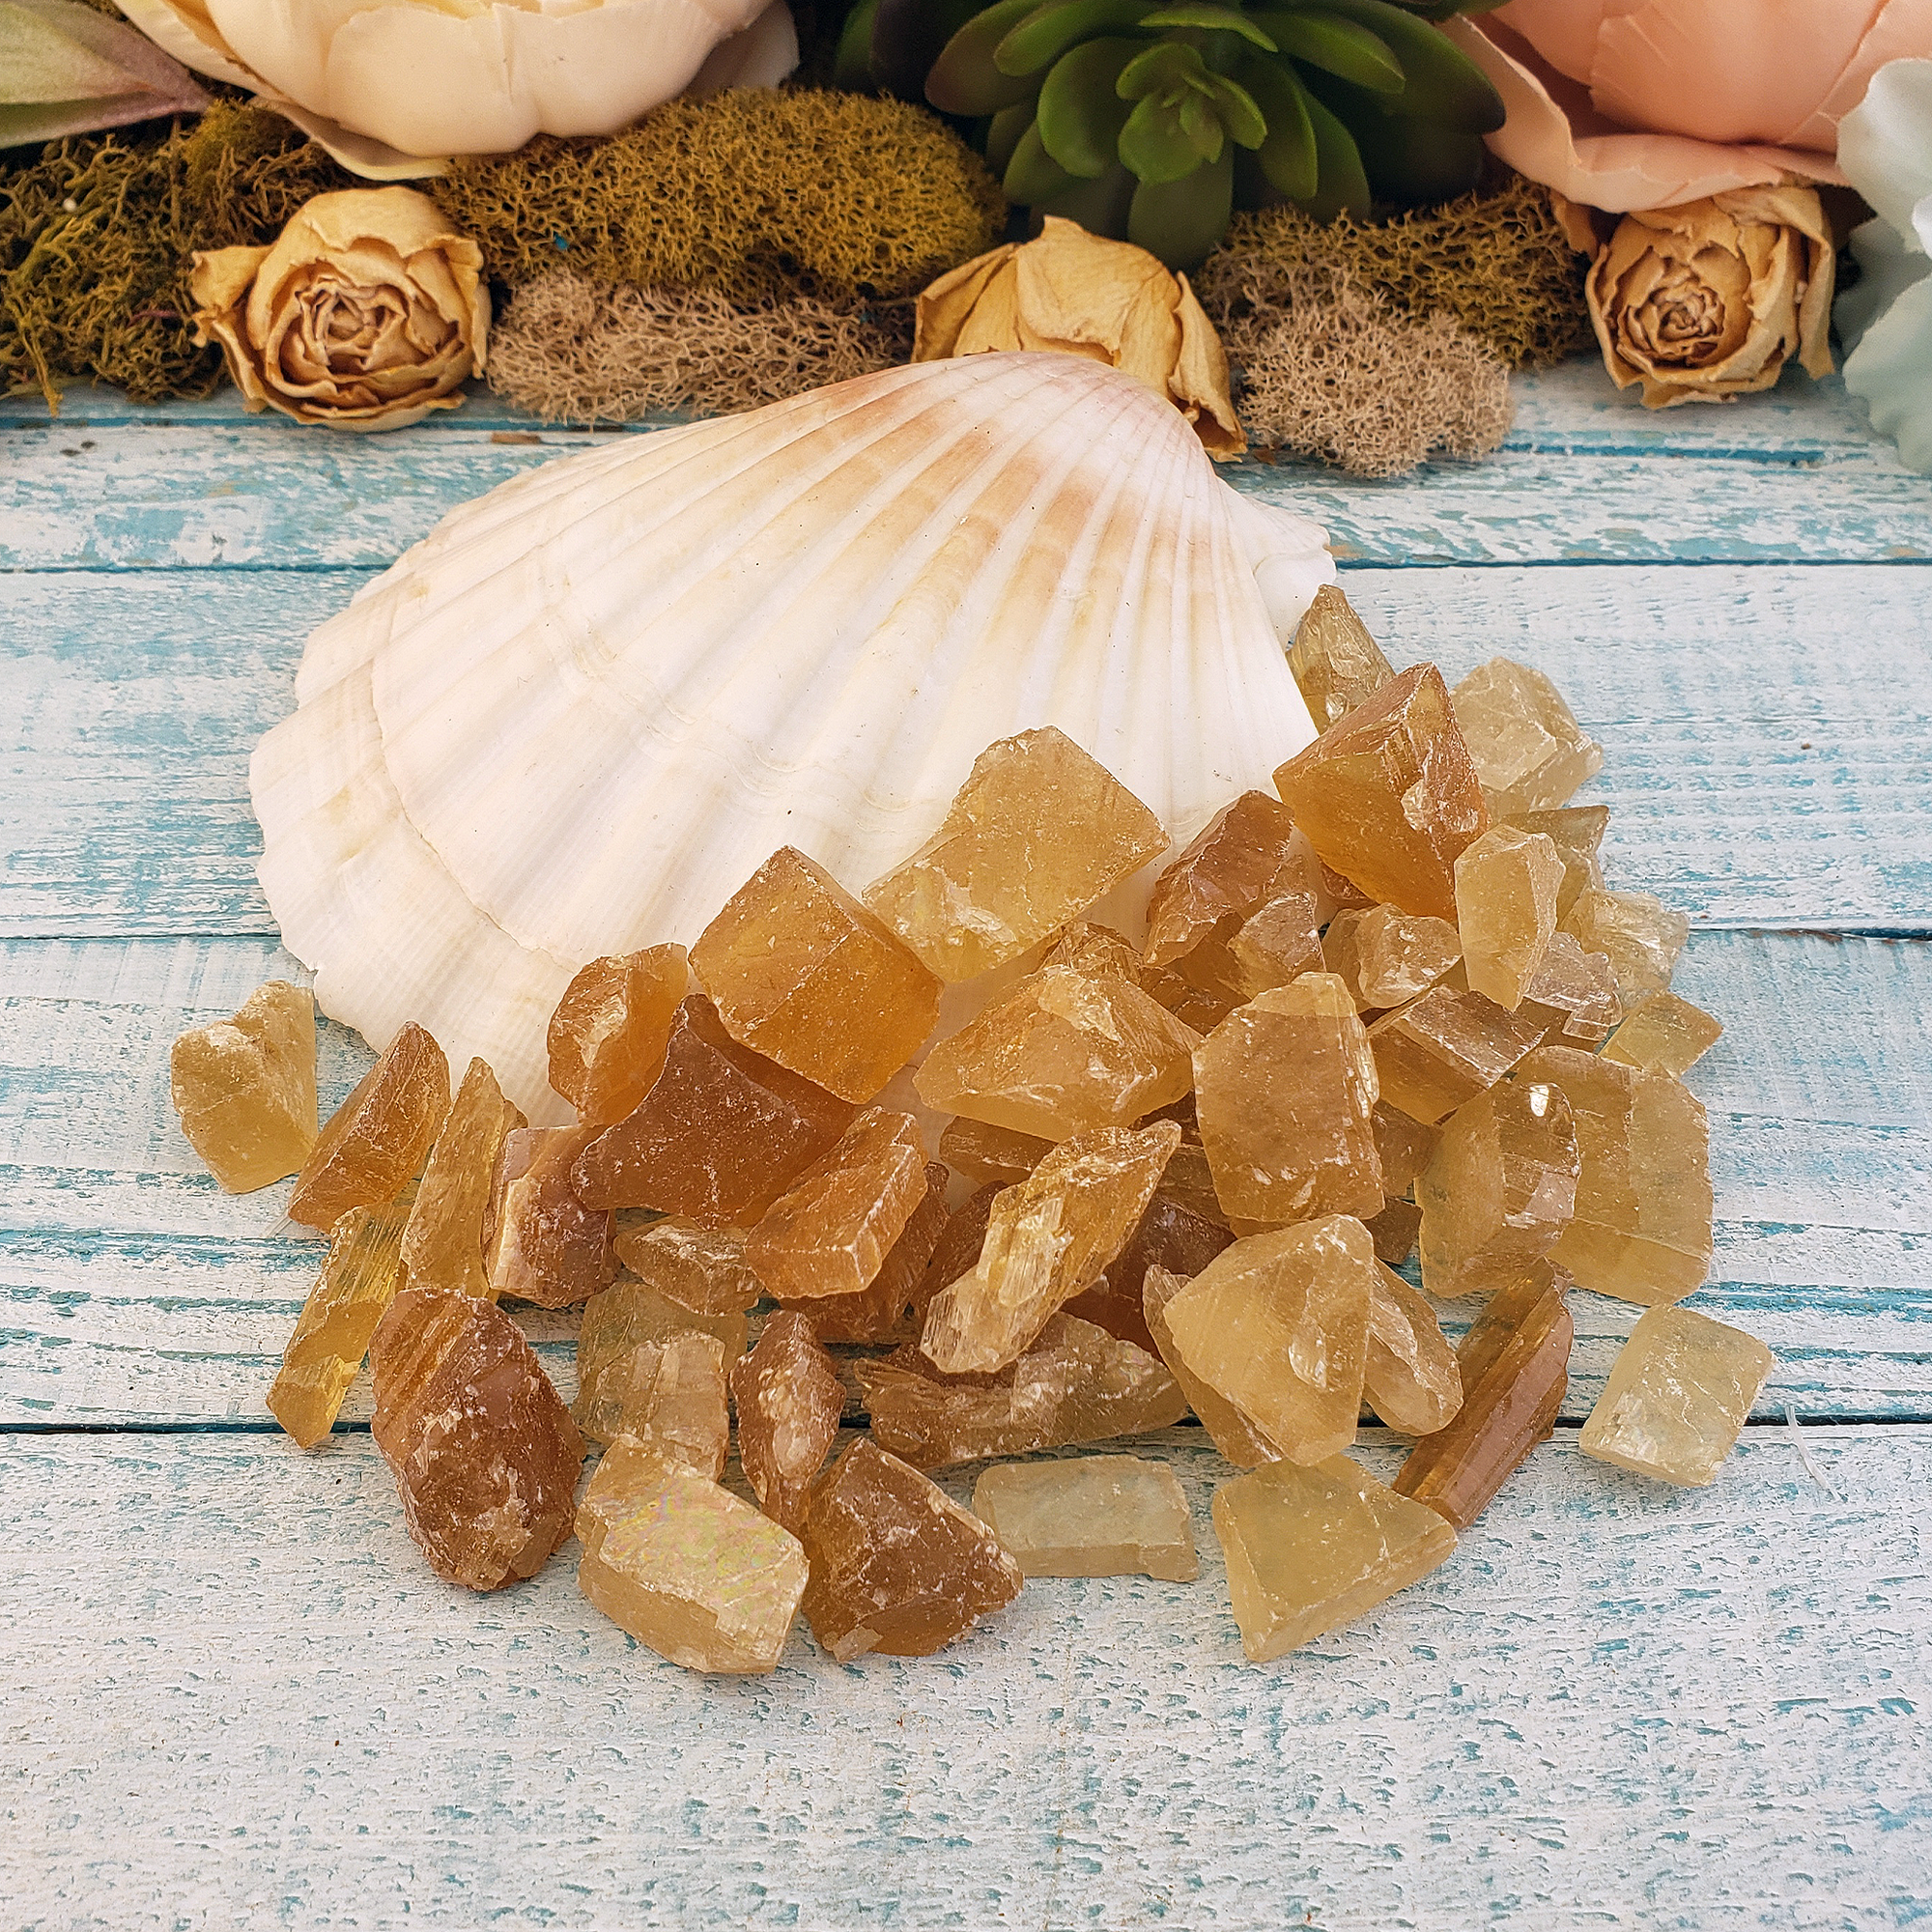 Honey Calcite Natural Raw Crystals Rough Gemstones - 3 Mini Stones - Next to Large Sea Shell